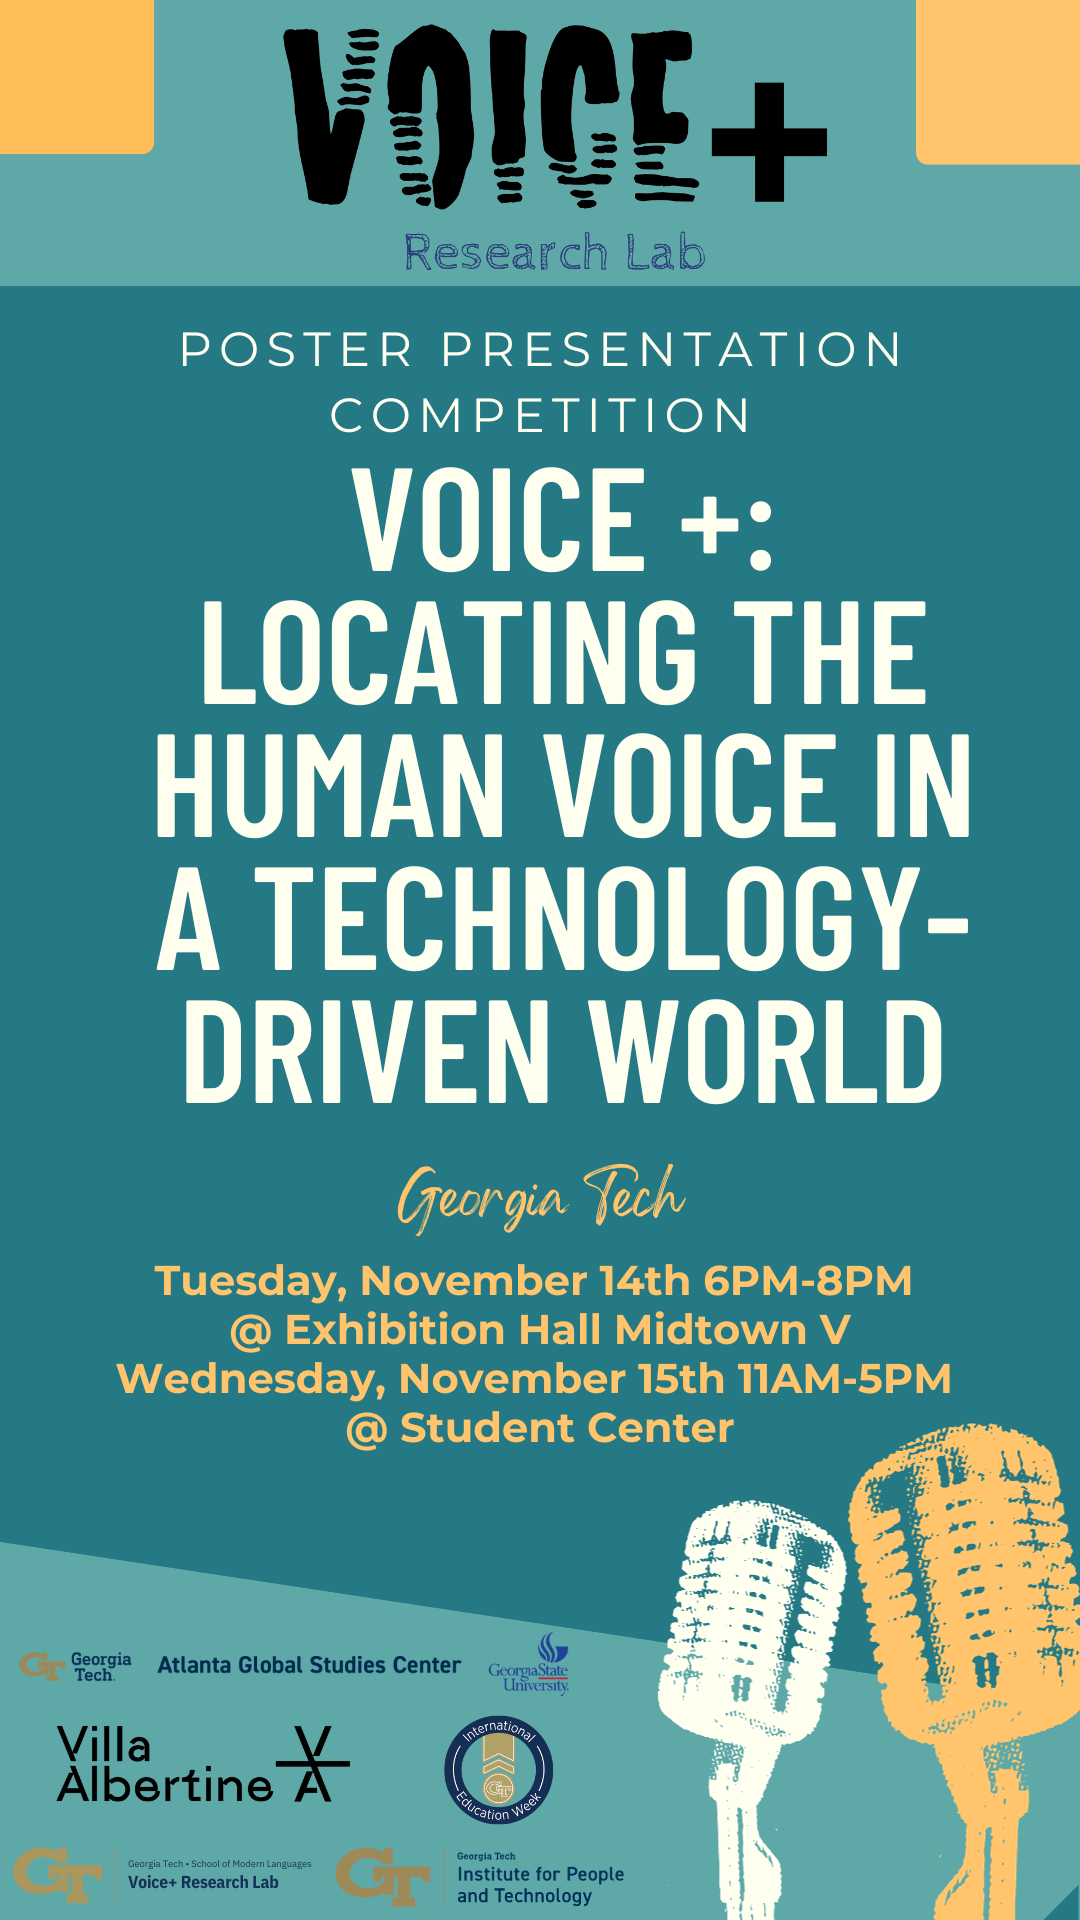 Voice+: Locating the Human Voice in a Technology-Driven World